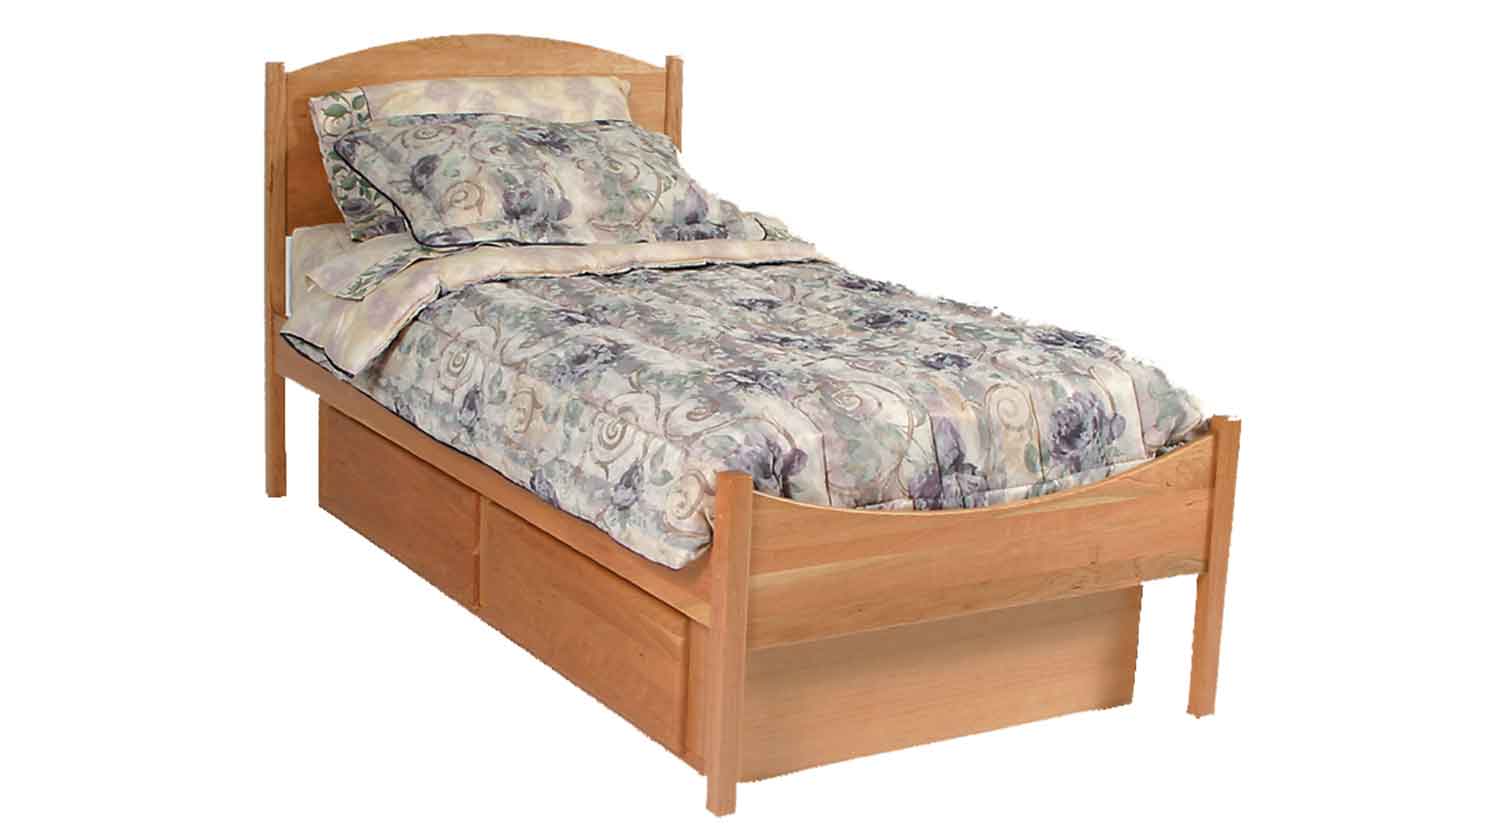 Circle Furniture Woodforms Shaker Bed, Cherry Wood Twin Bed Frame